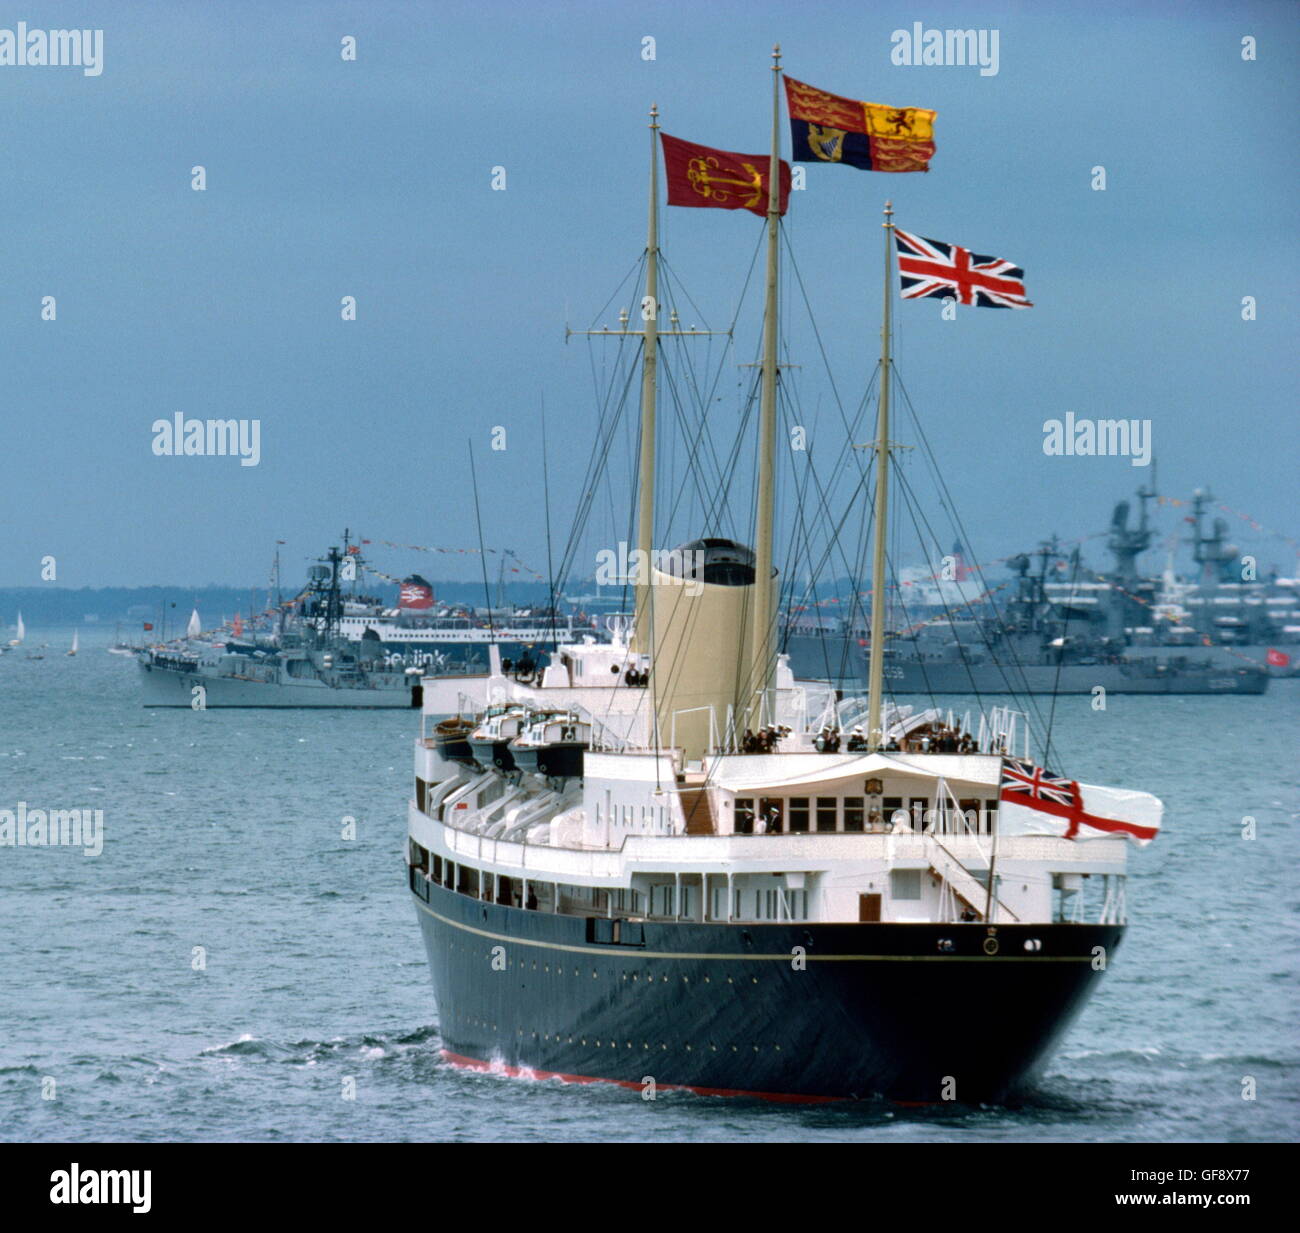 AJAX NEWS PHOTOS. 1977. SPITHEAD, ENGLAND. - ROYAL YACHT - THE ROYAL YACHT BRITANNIA WITH H.M.QUEEN ELIZABETH II EMBARKED, REVIEWING THE FLEET DURING THE 1977 SILVER JUBILEE FLEET REVIEW.  PHOTO:JONATHAN EASTLAND/AJAX  REF:907448 Stock Photo